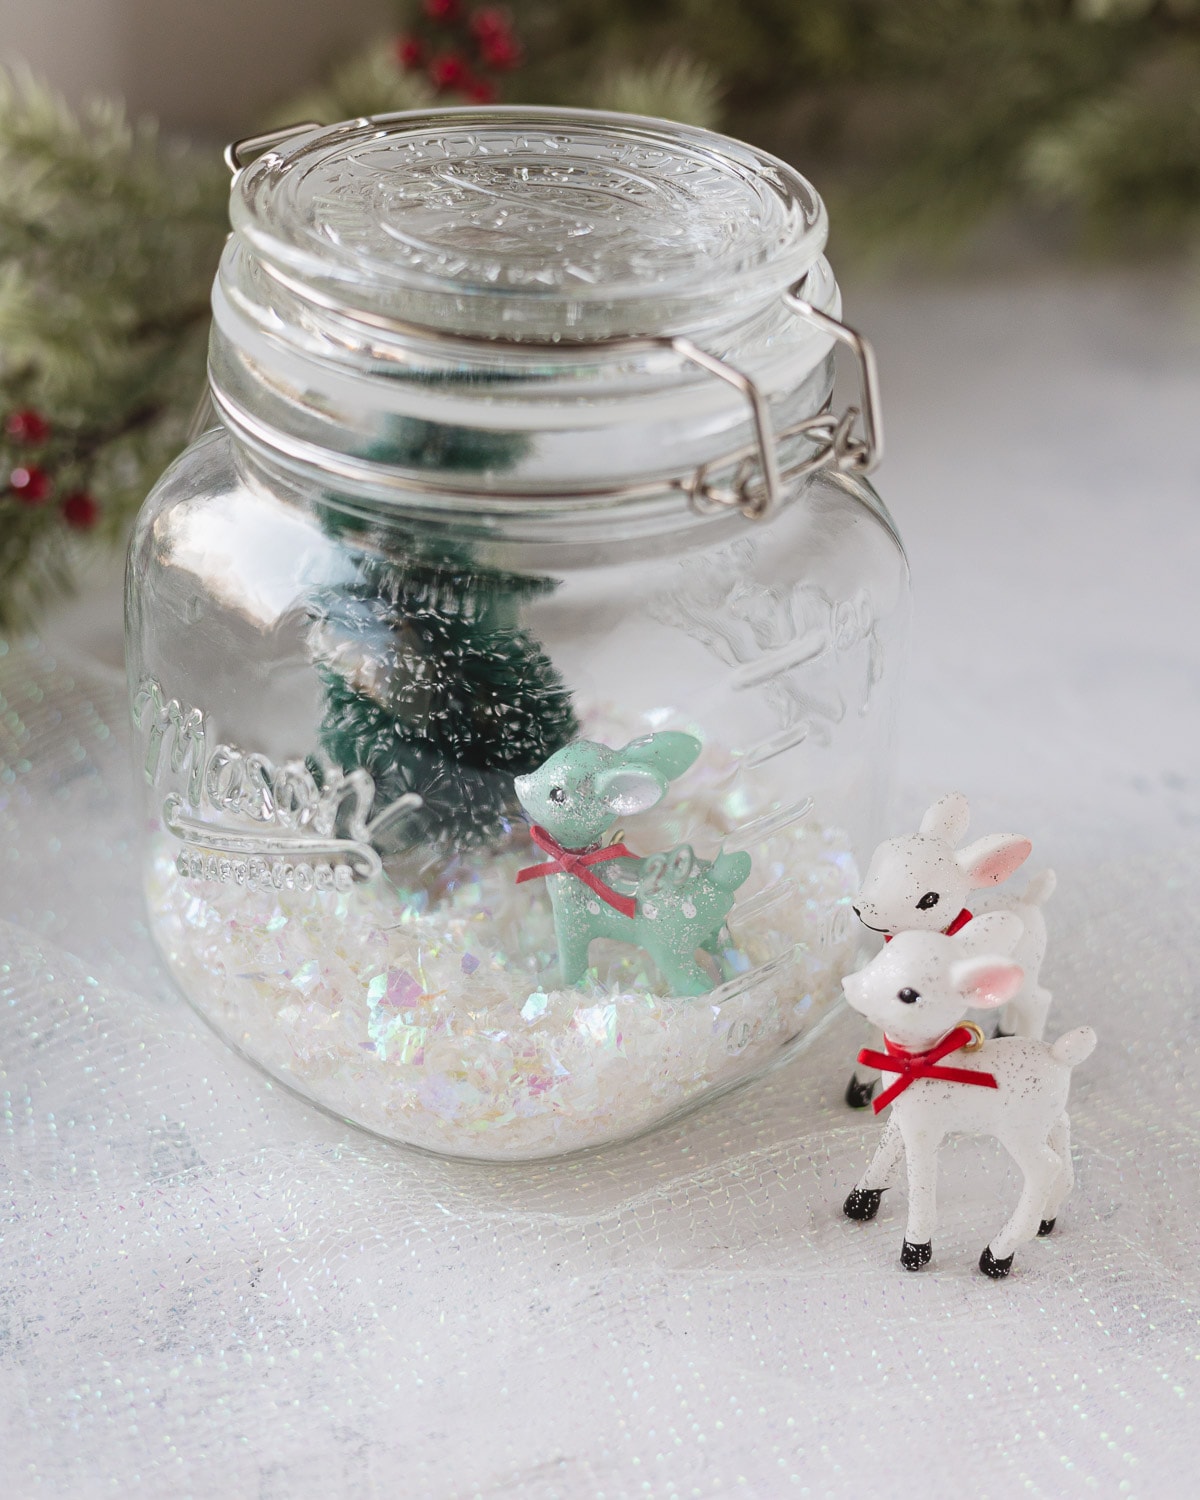 Two mini white reindeer and a mason jar filled with faux snow and a mini green reindeer.